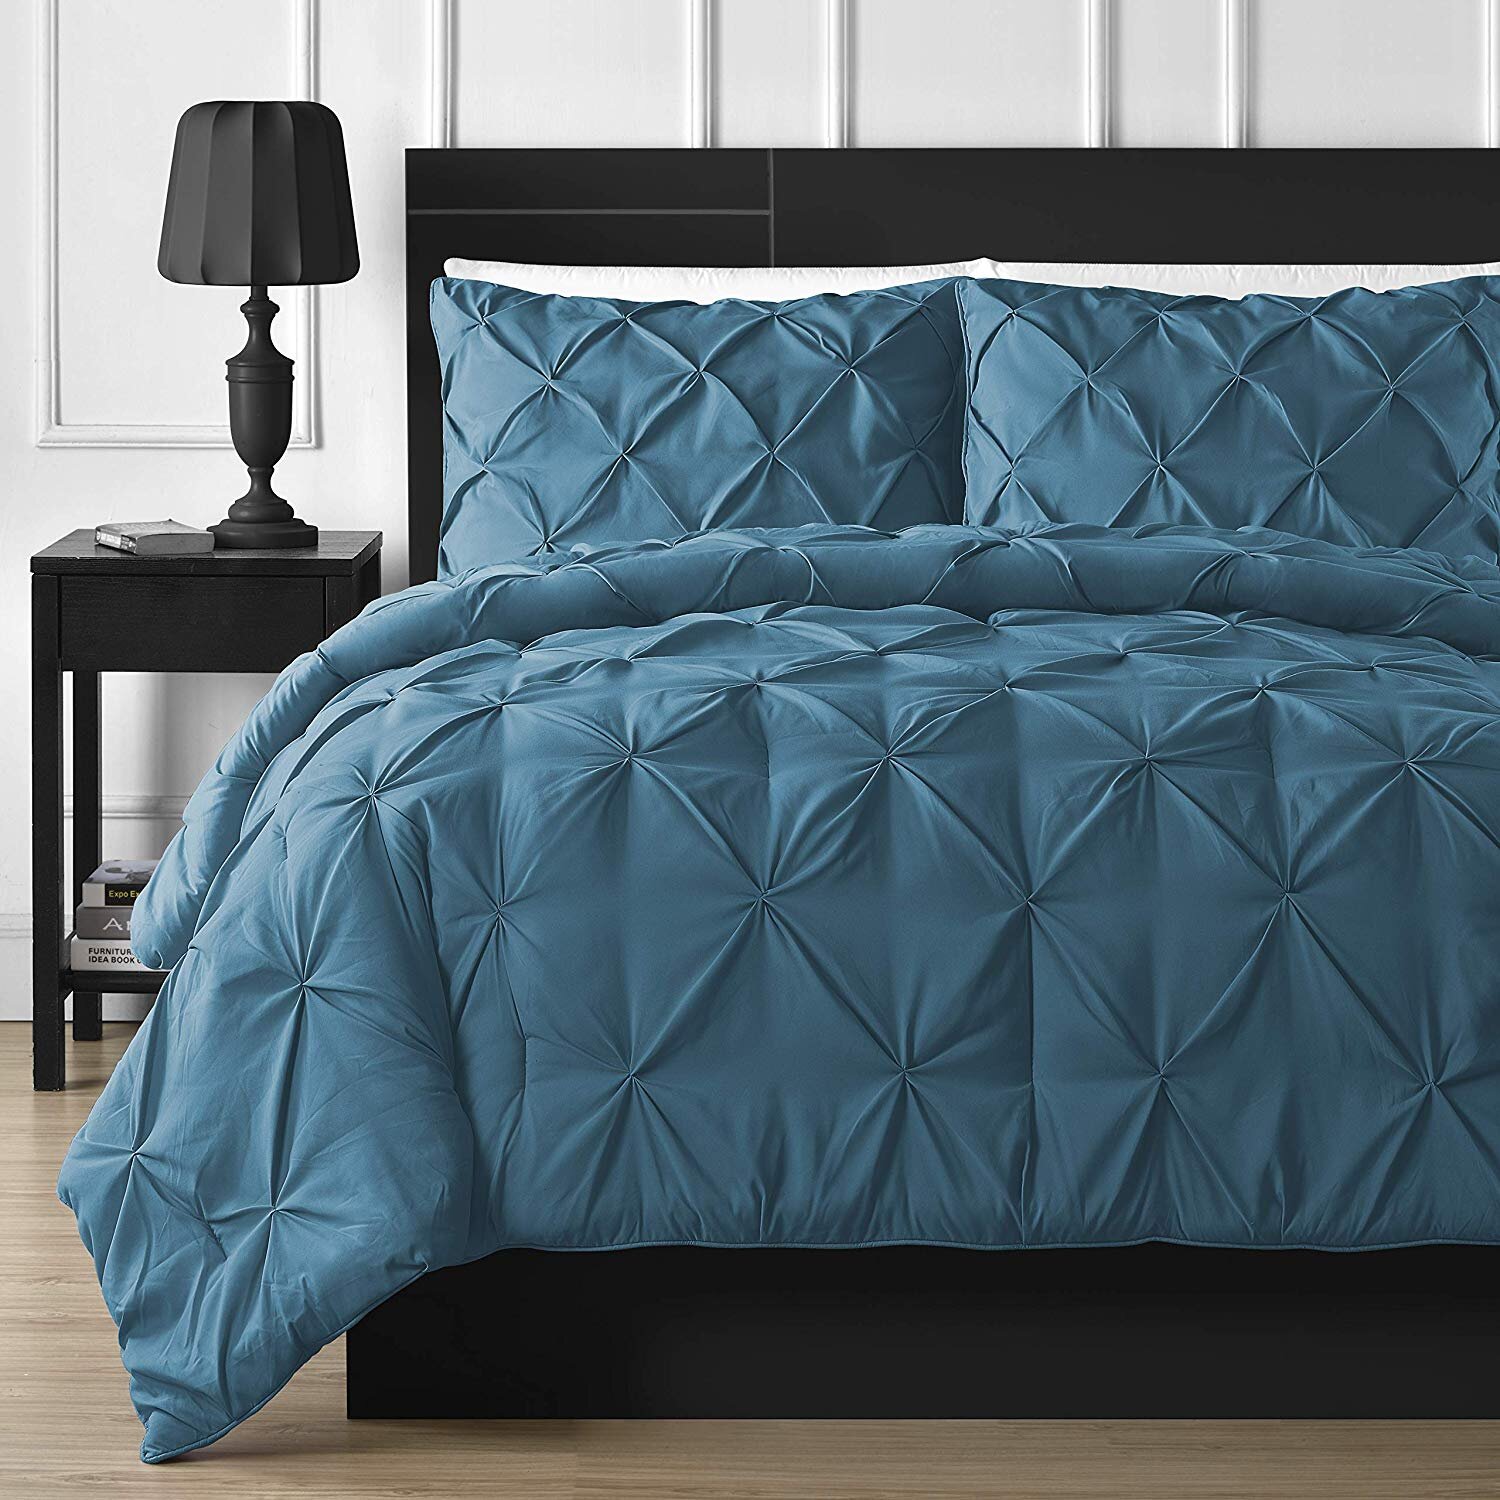 King Size Teal Comforters Sets You Ll Love In 2021 Wayfair